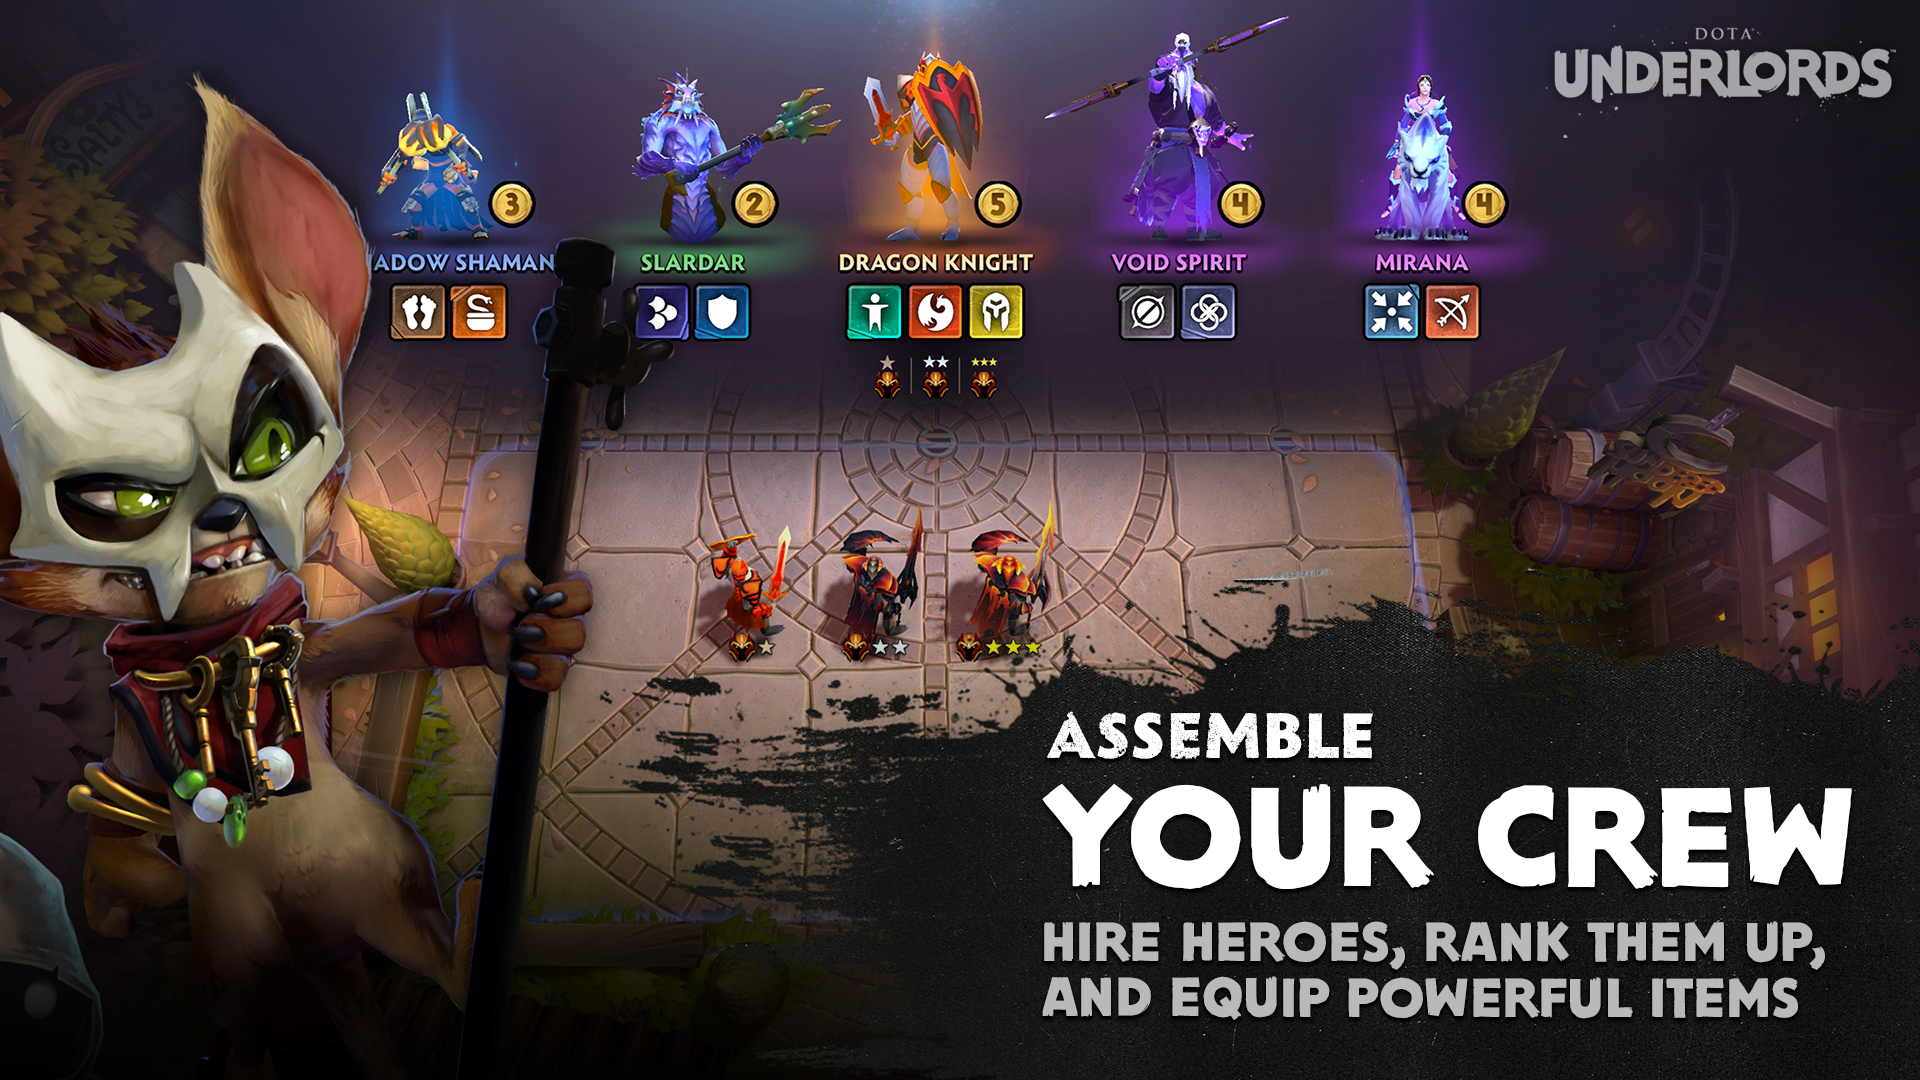 Image from Dota Underlords